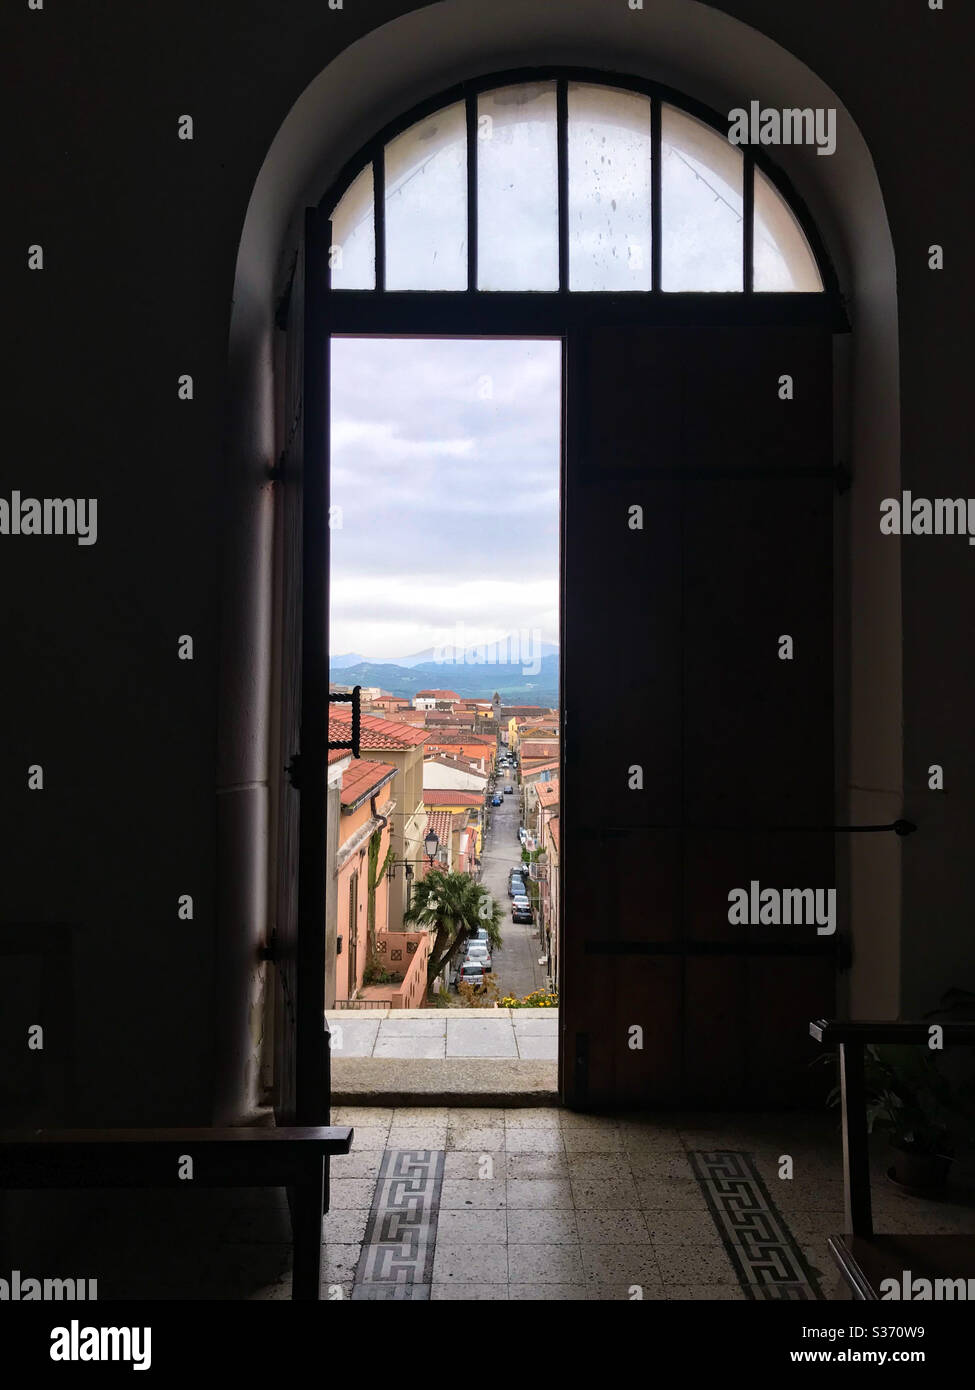 A view of an Italian town in Sardinia from inside a church on a hill. Stock Photo